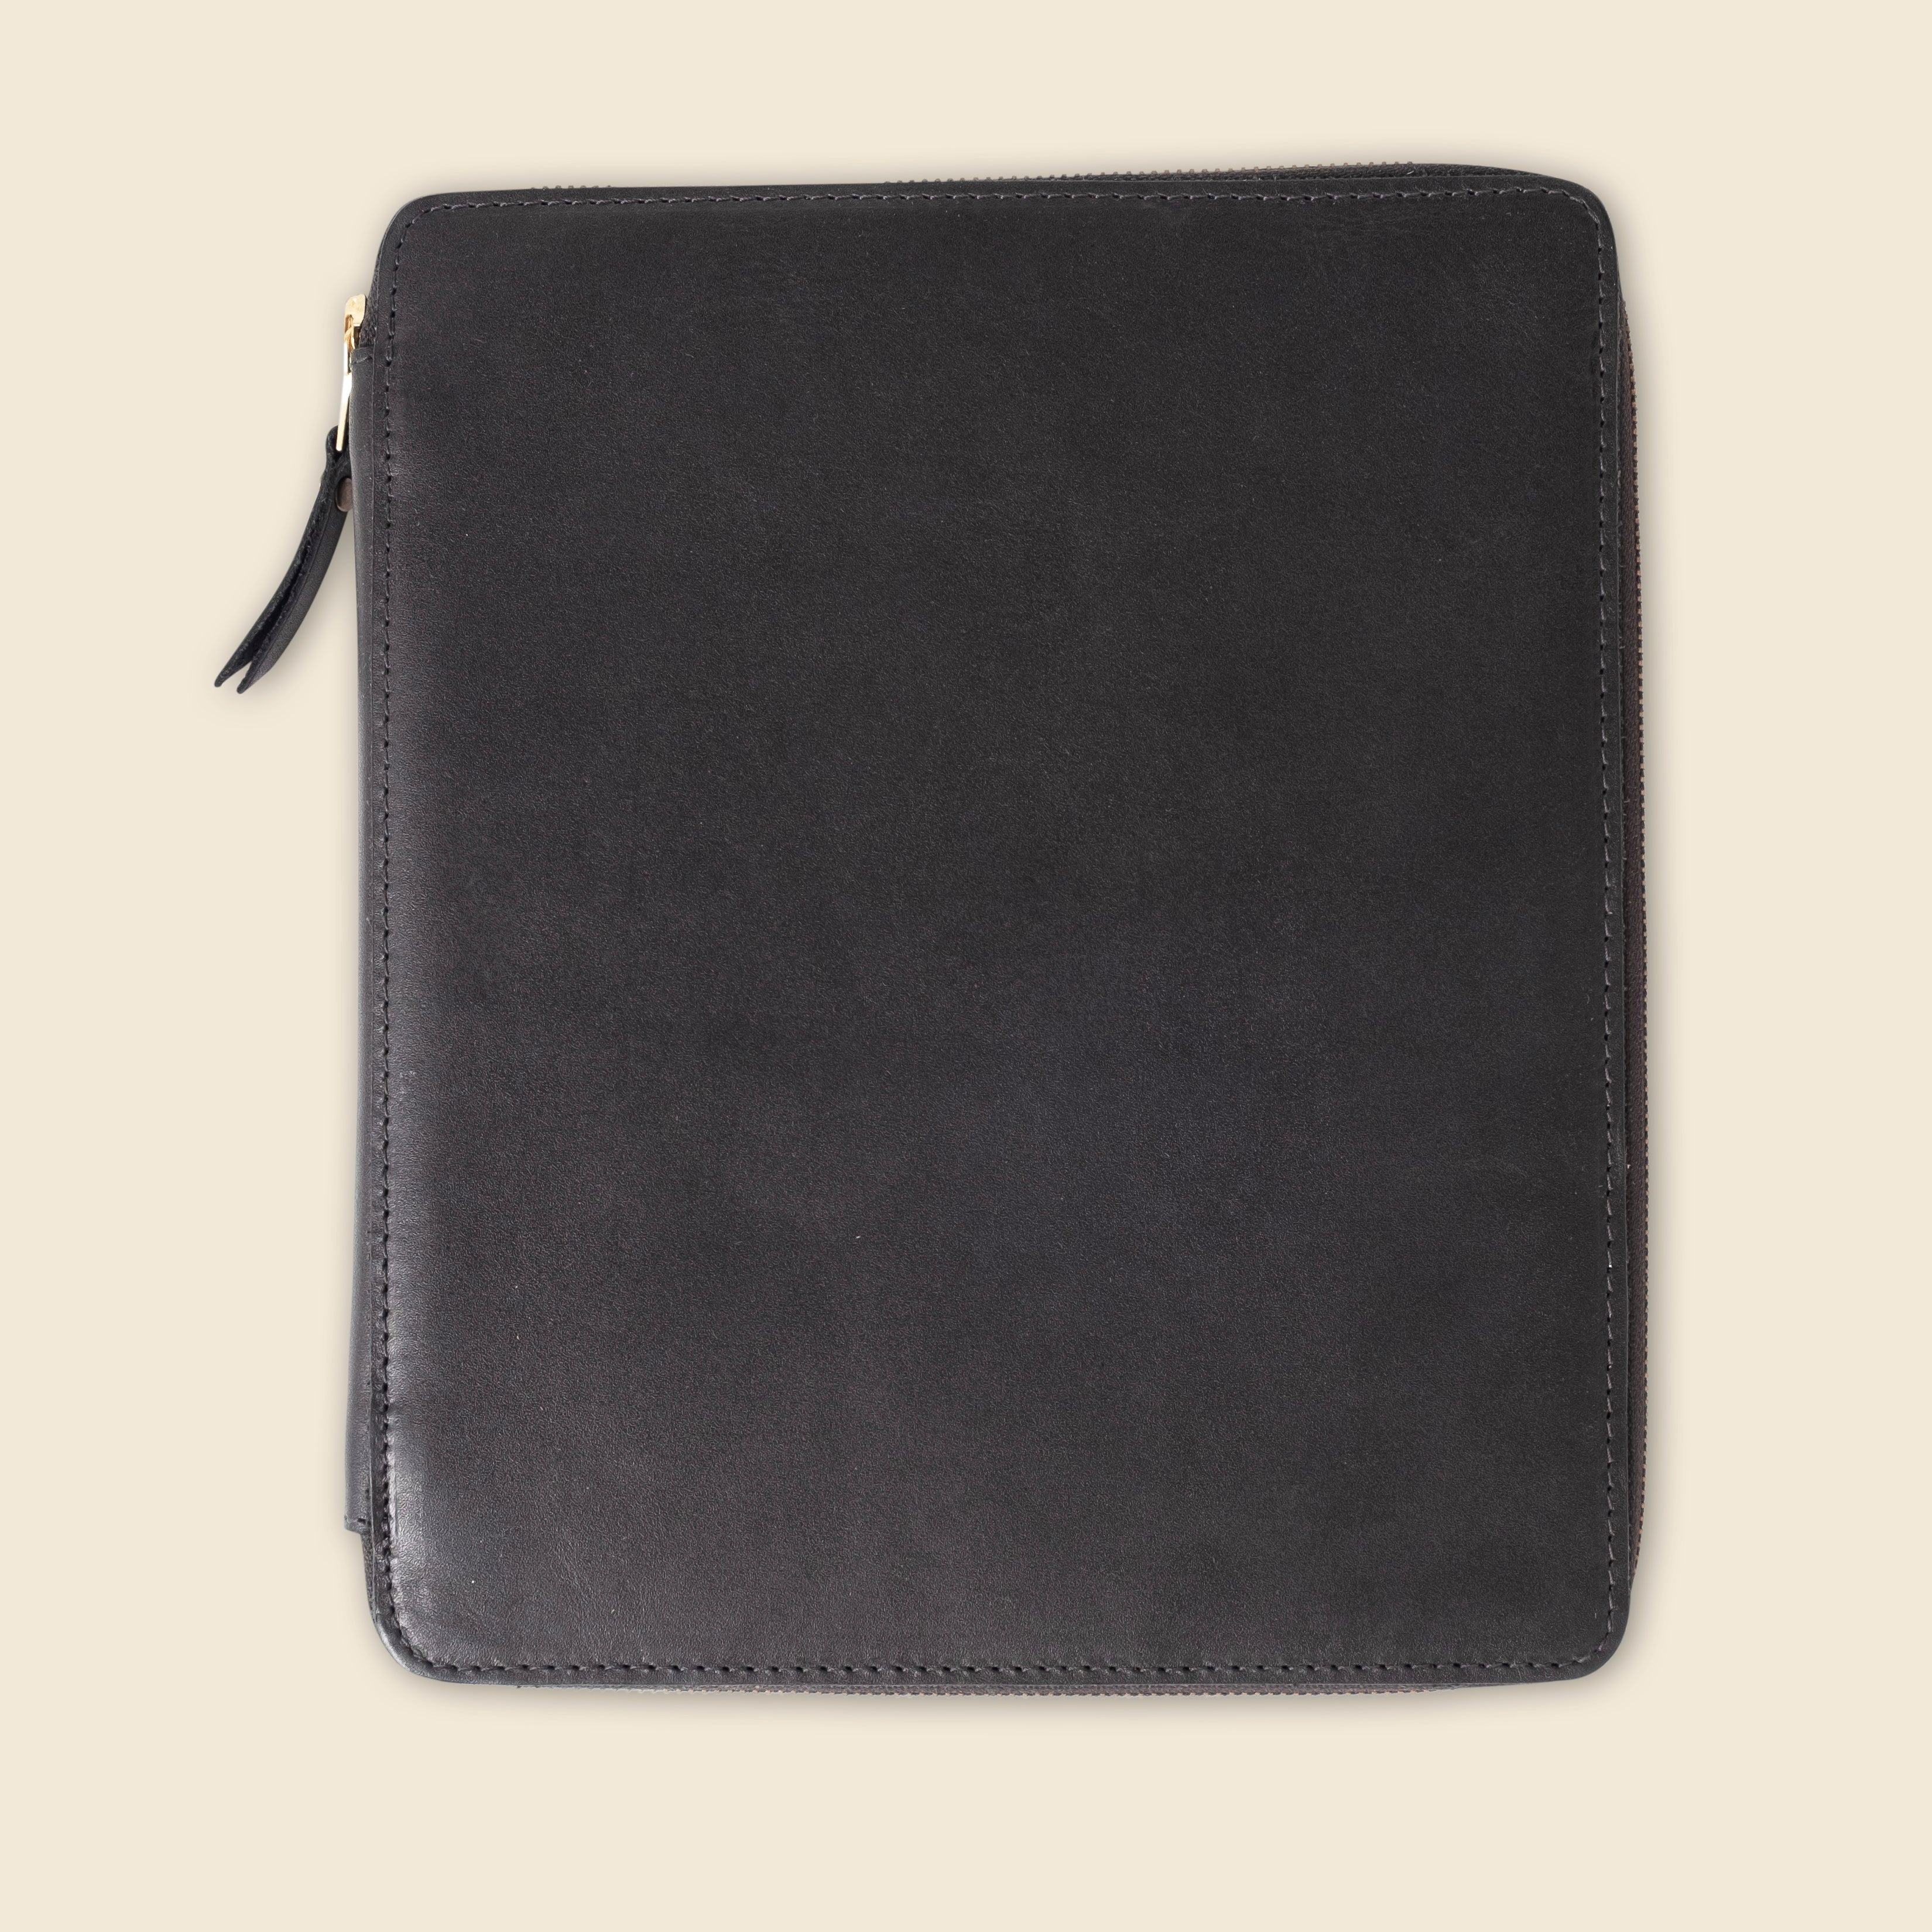 Private label leather goods for gifting